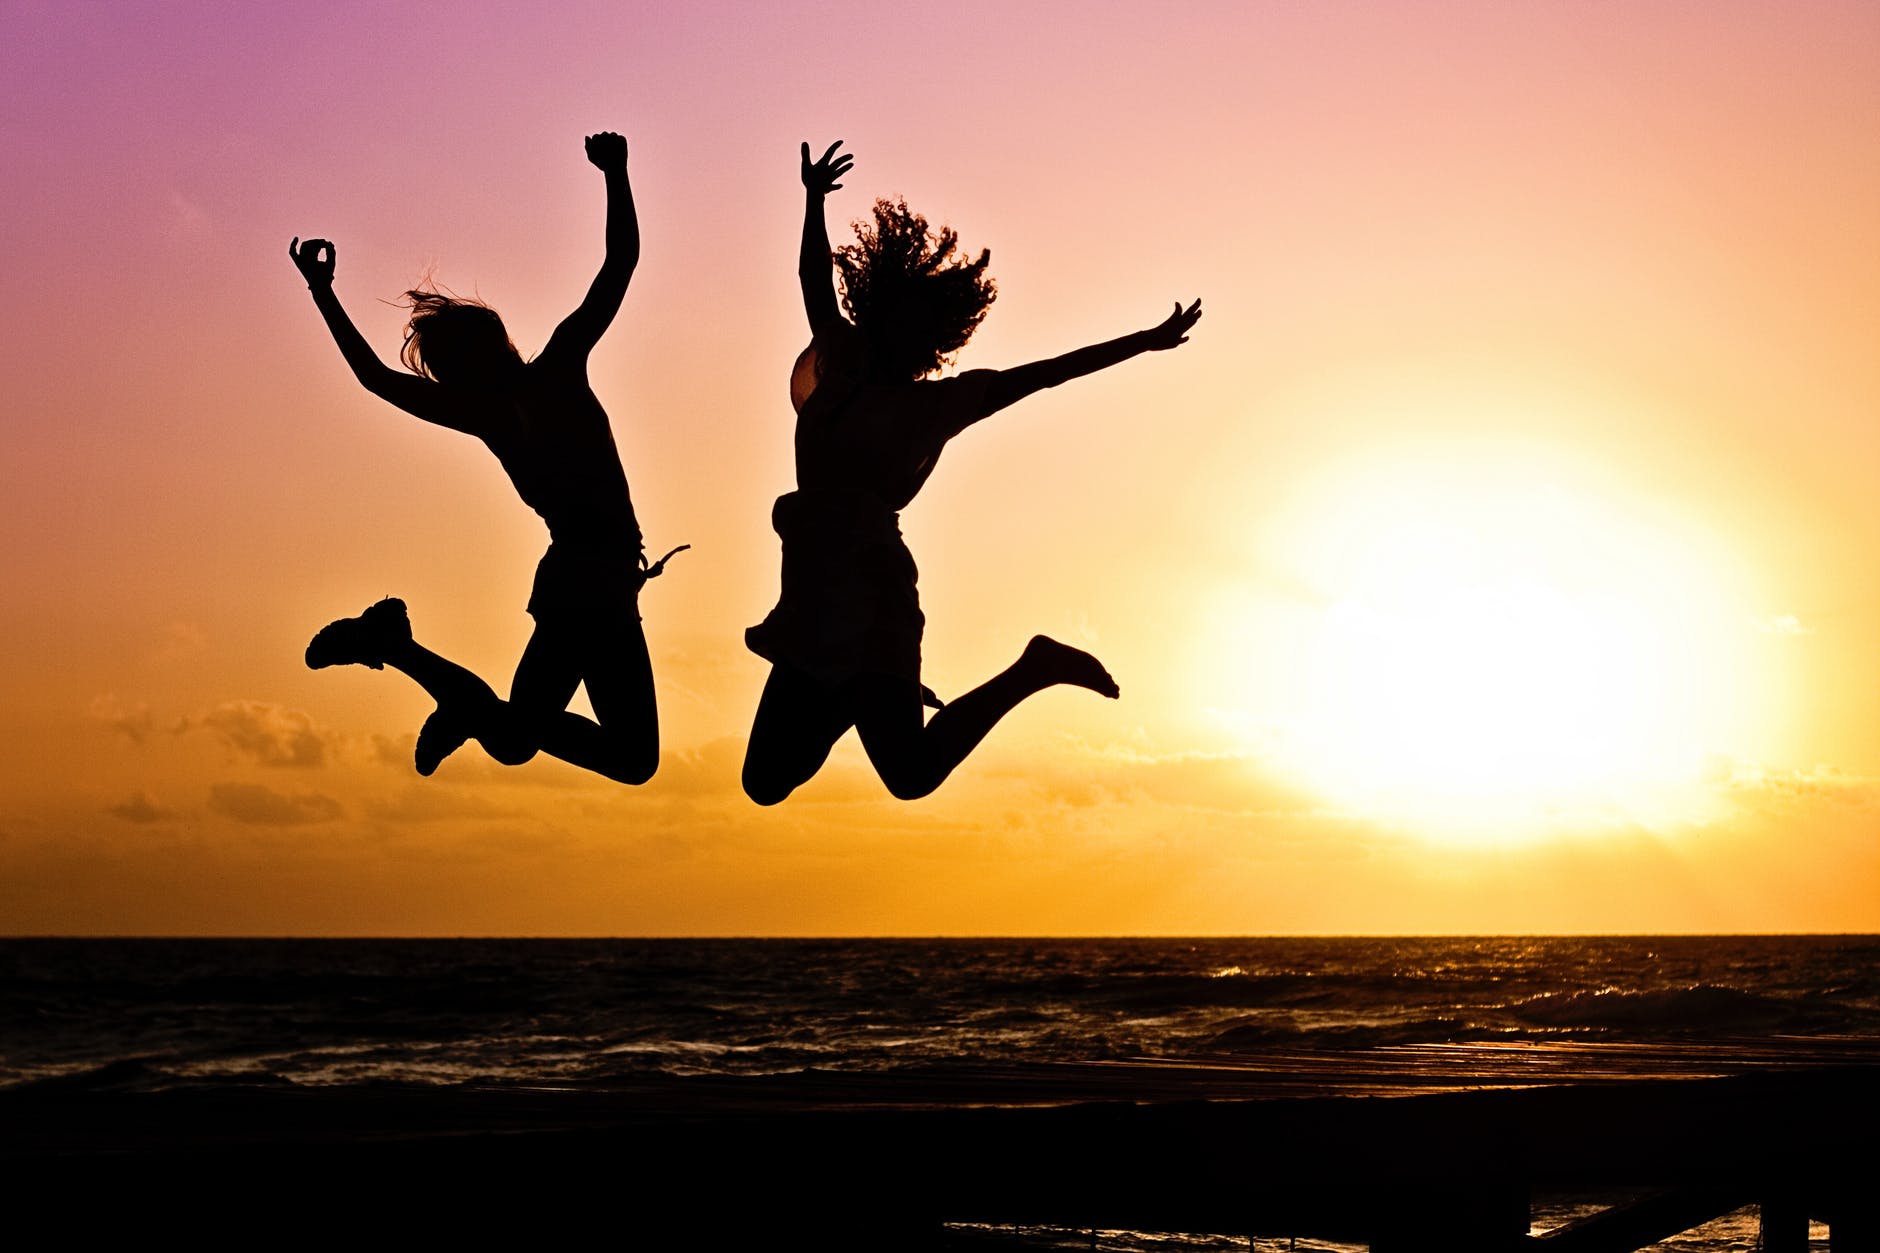 silhouette photography of jump shot of two persons